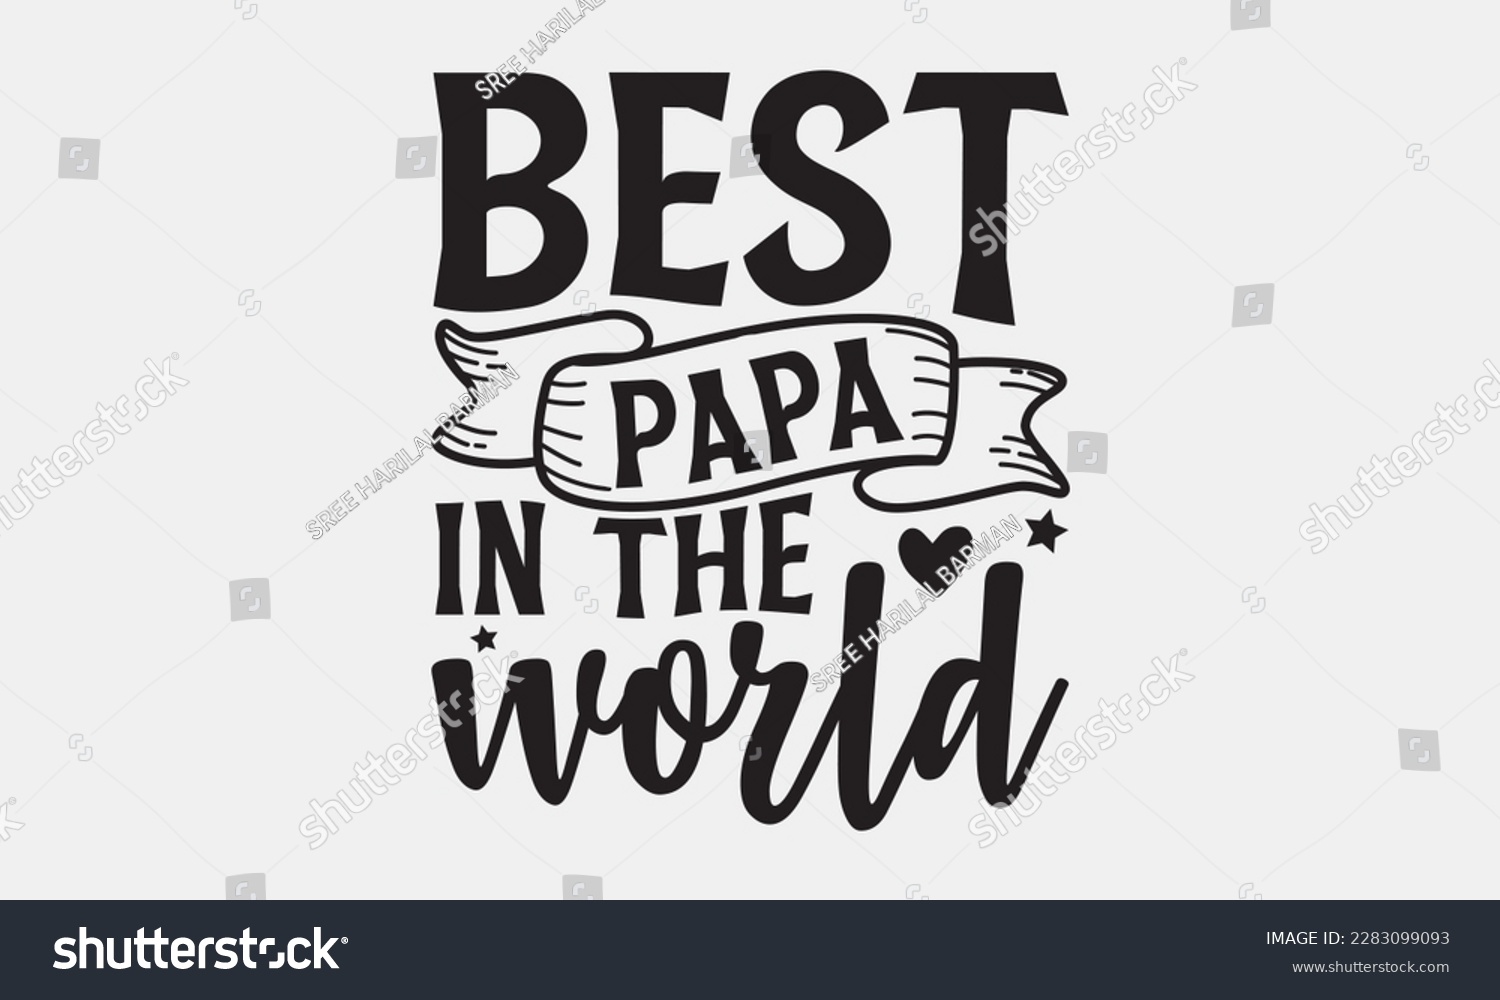 SVG of Best papa in the world - Father's day svg typography t-shirt design. celebration in calligraphy text or font means jun father's day in the Middle East. Greeting templates, cards, mugs, brochures. svg